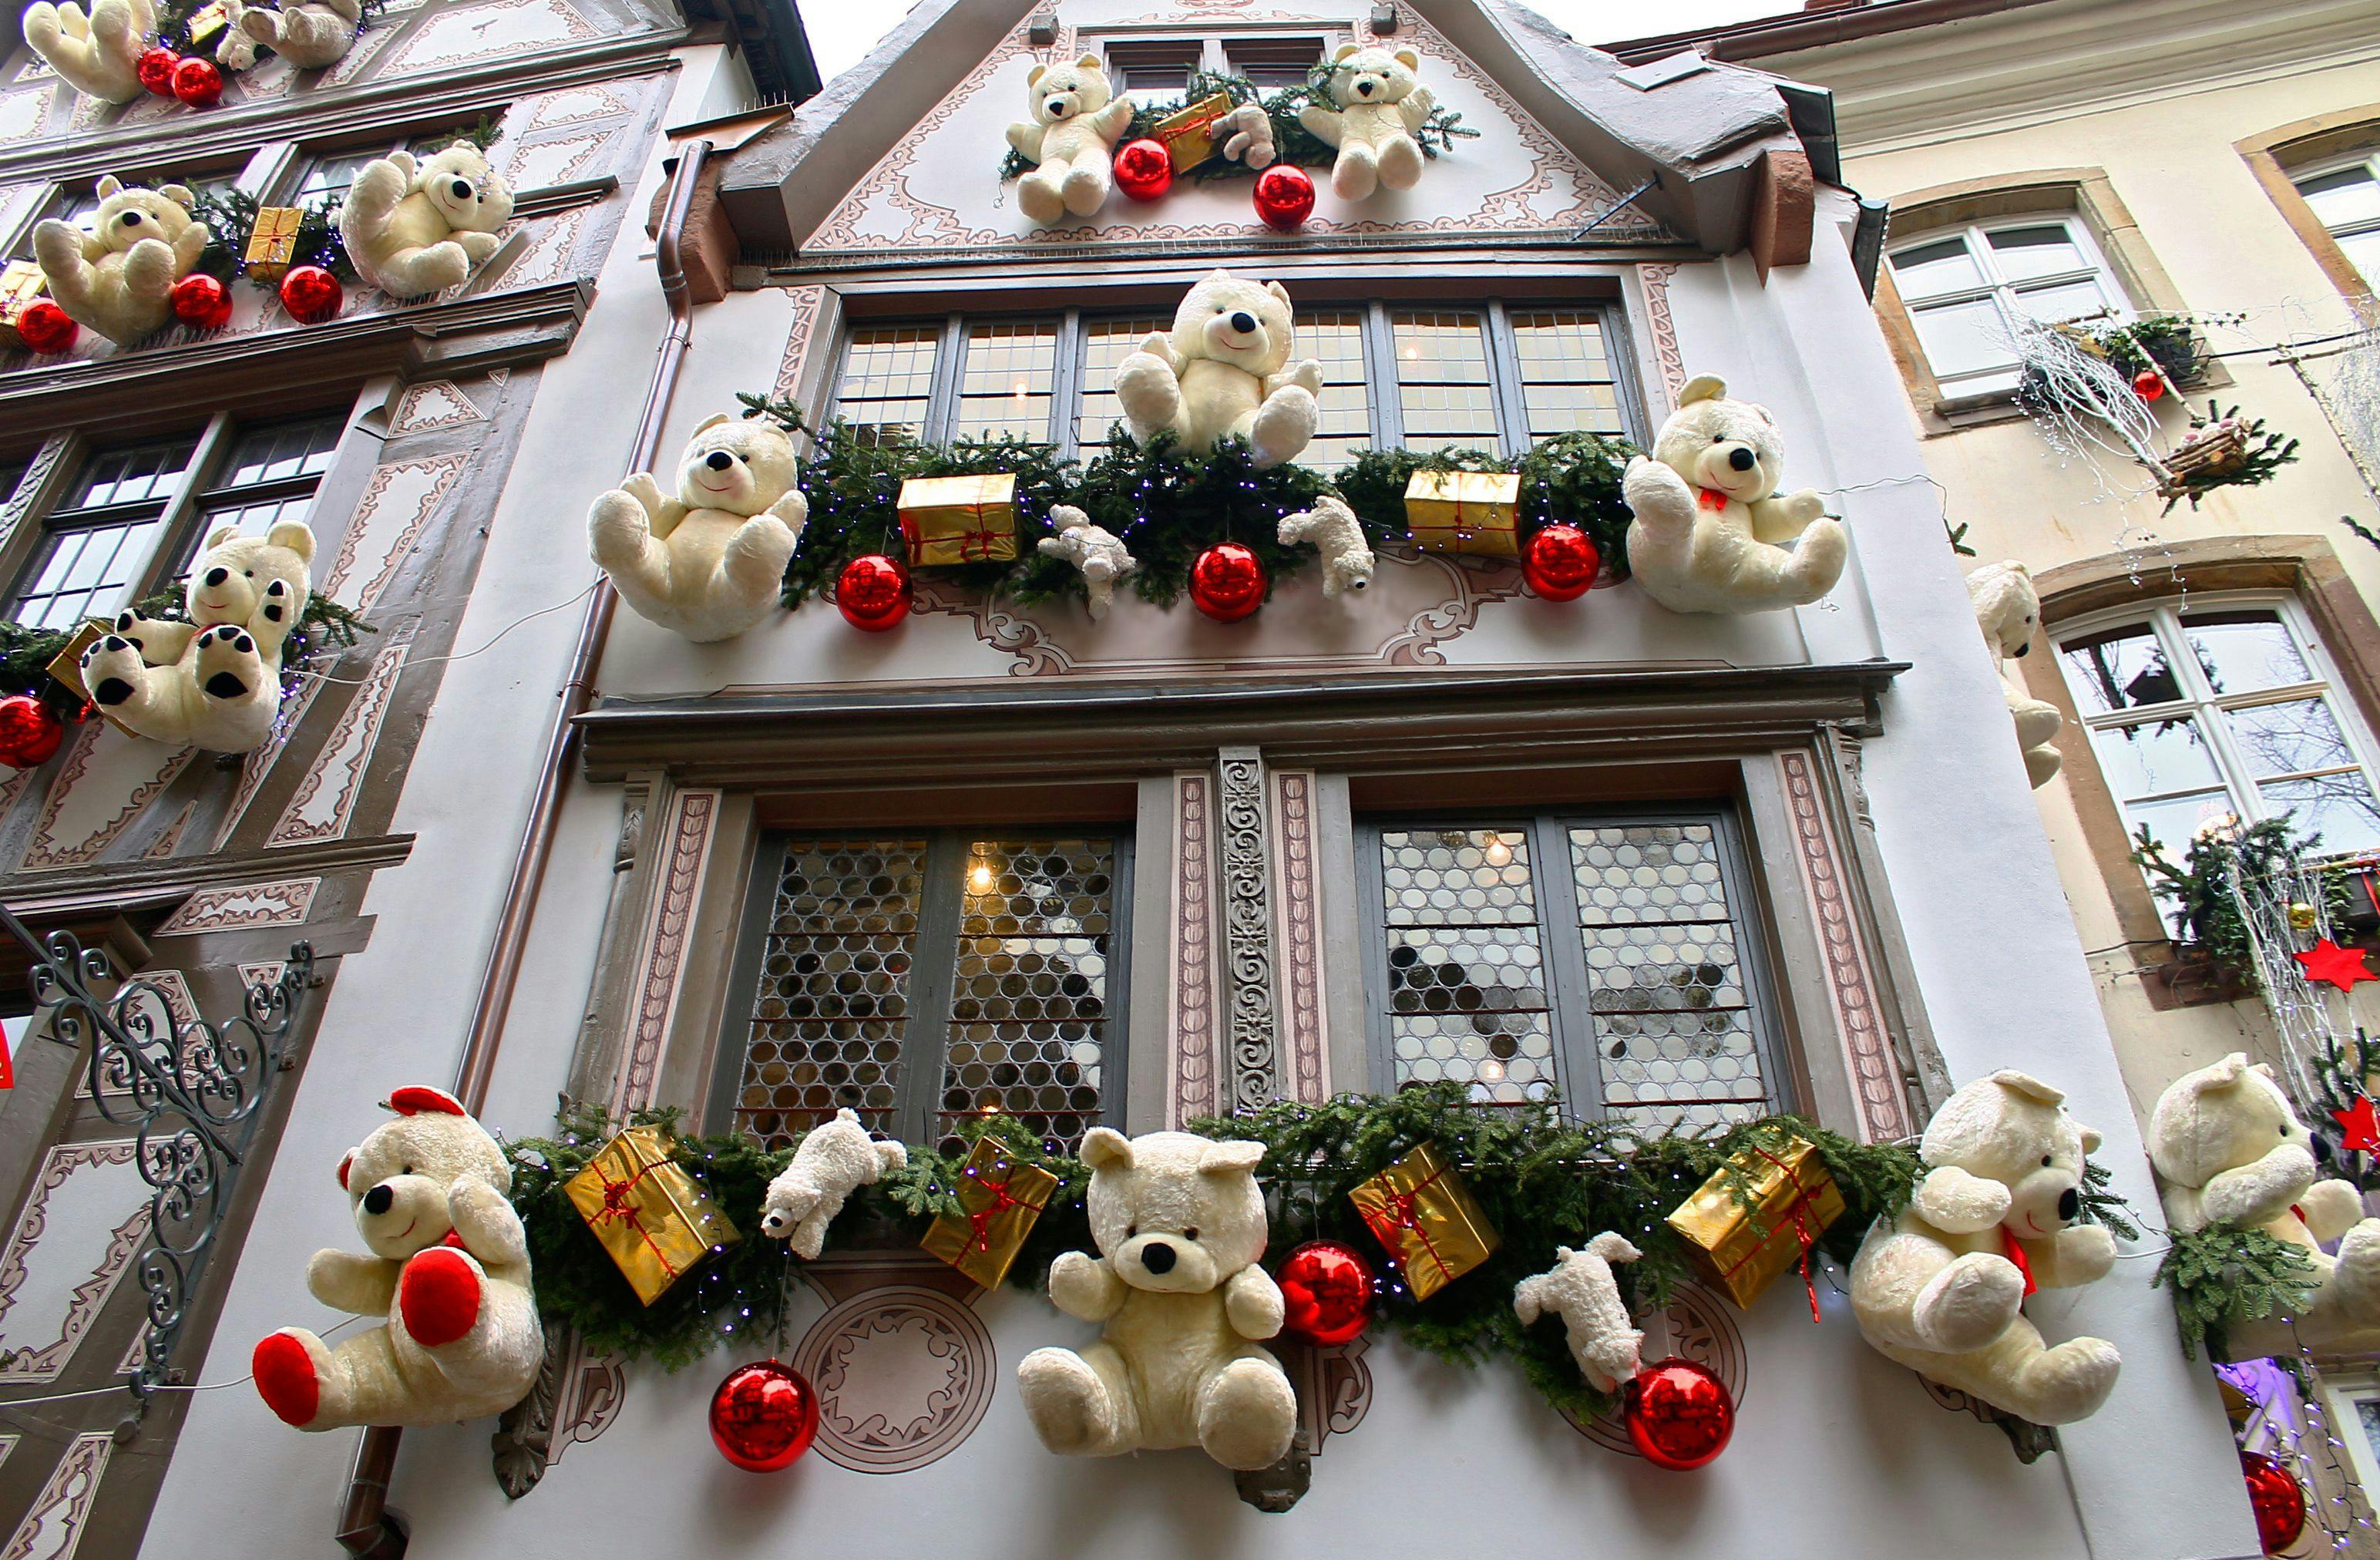 Visit Strasbourg: From Petite France to European Parliament - Strasbourg Christmas markets and teddy bears - ratepunk